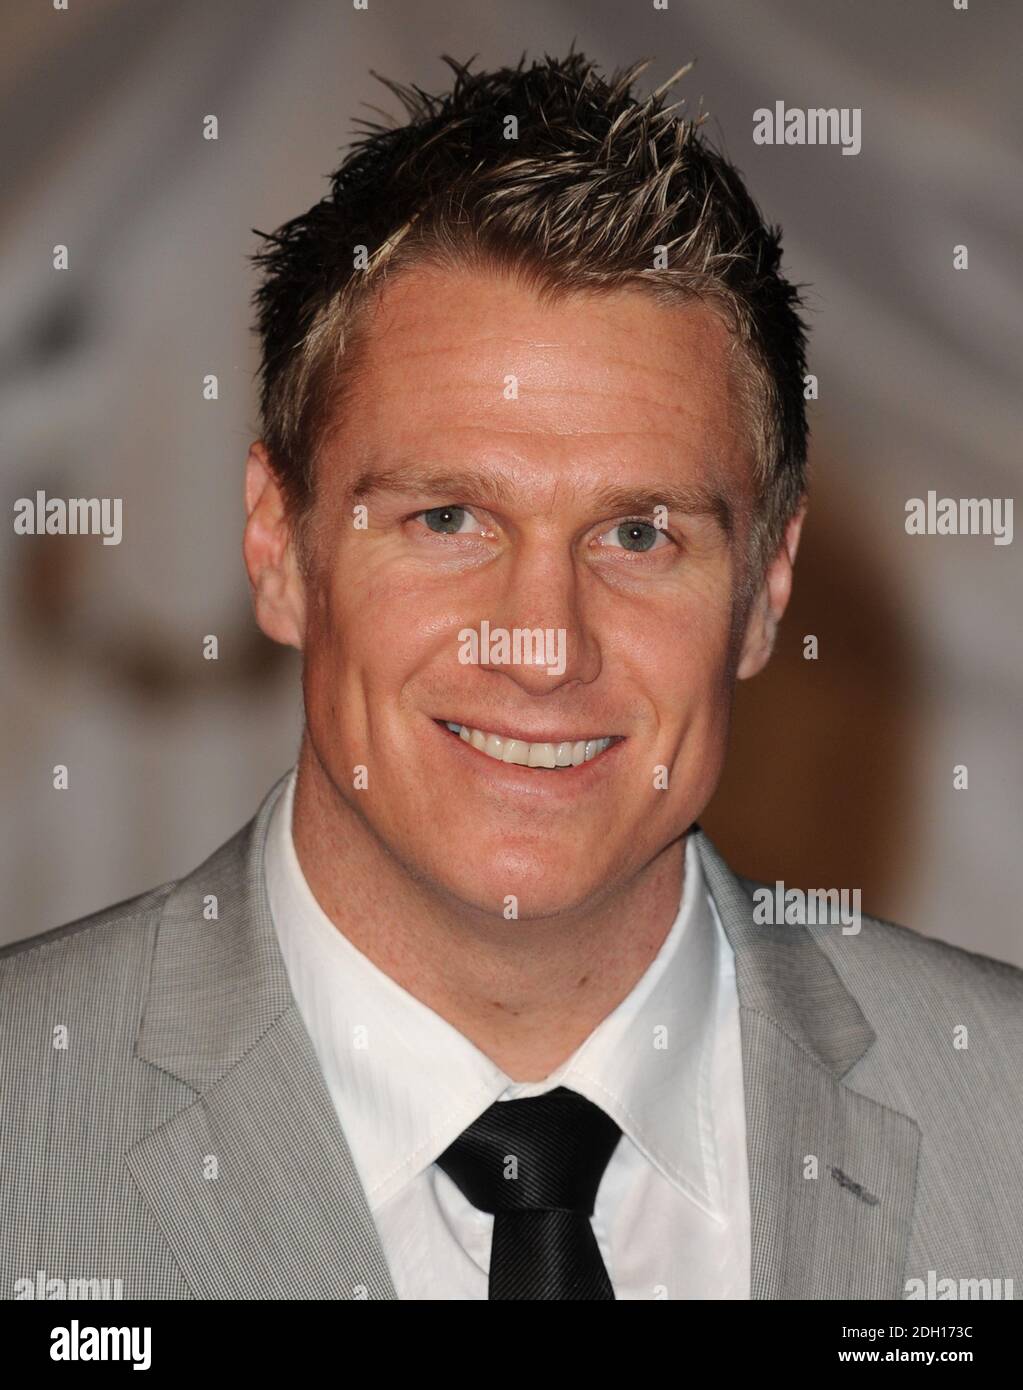 Jean De Villiers High Resolution Stock Photography and Images - Alamy